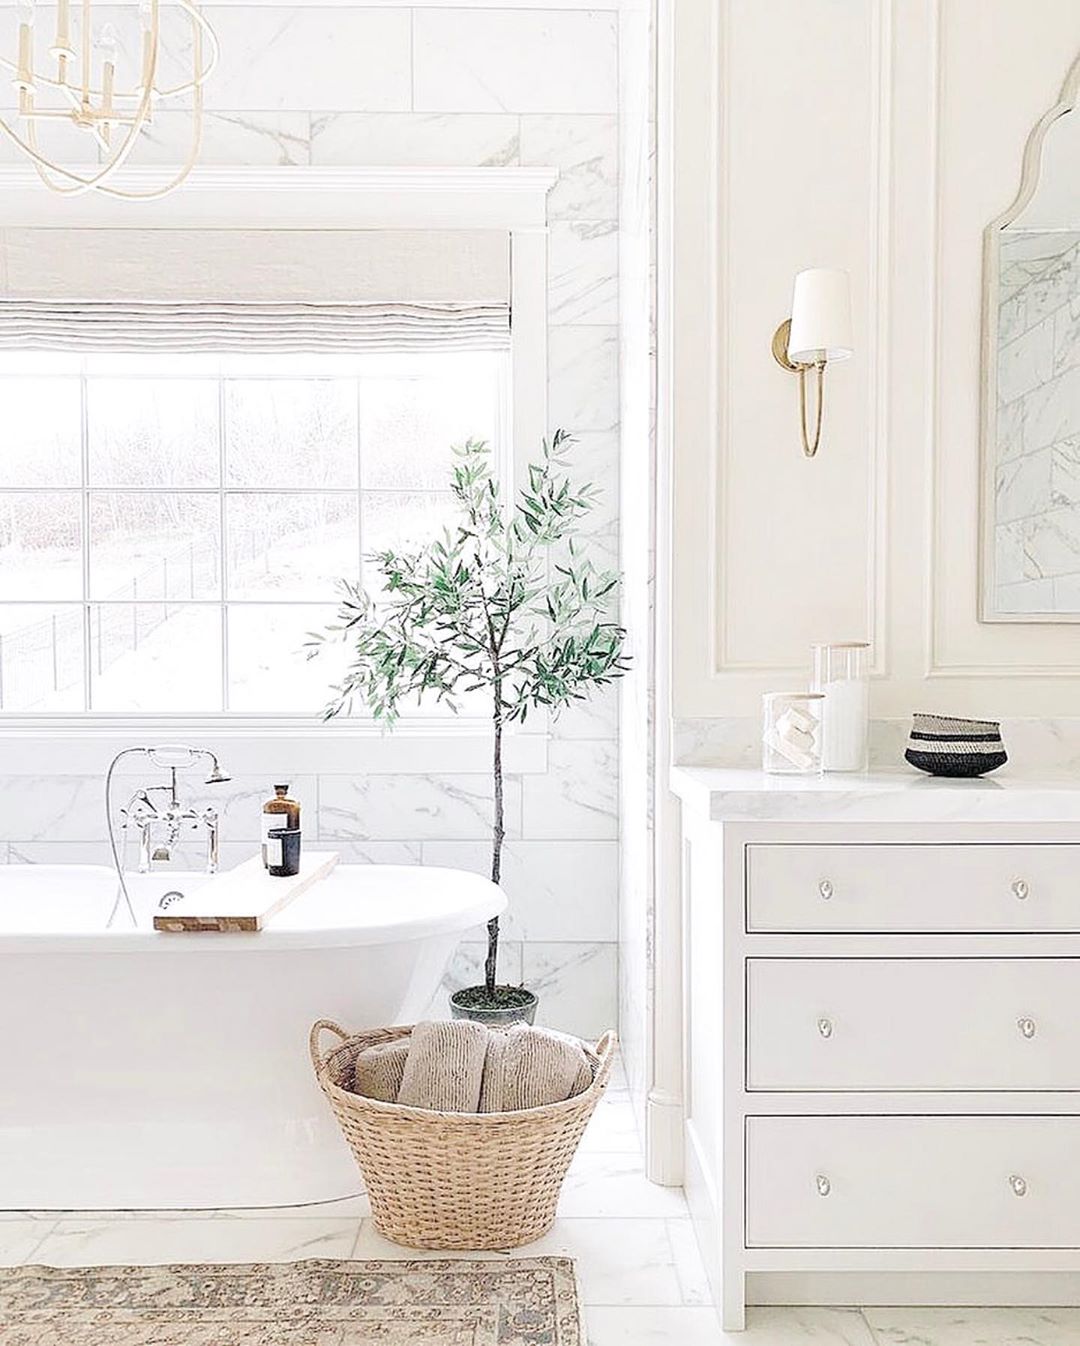 bathroom with lots of natural light next to soaking tub with small shrub in the bathroom photo by Instagram user @chandeliers.and.champagne